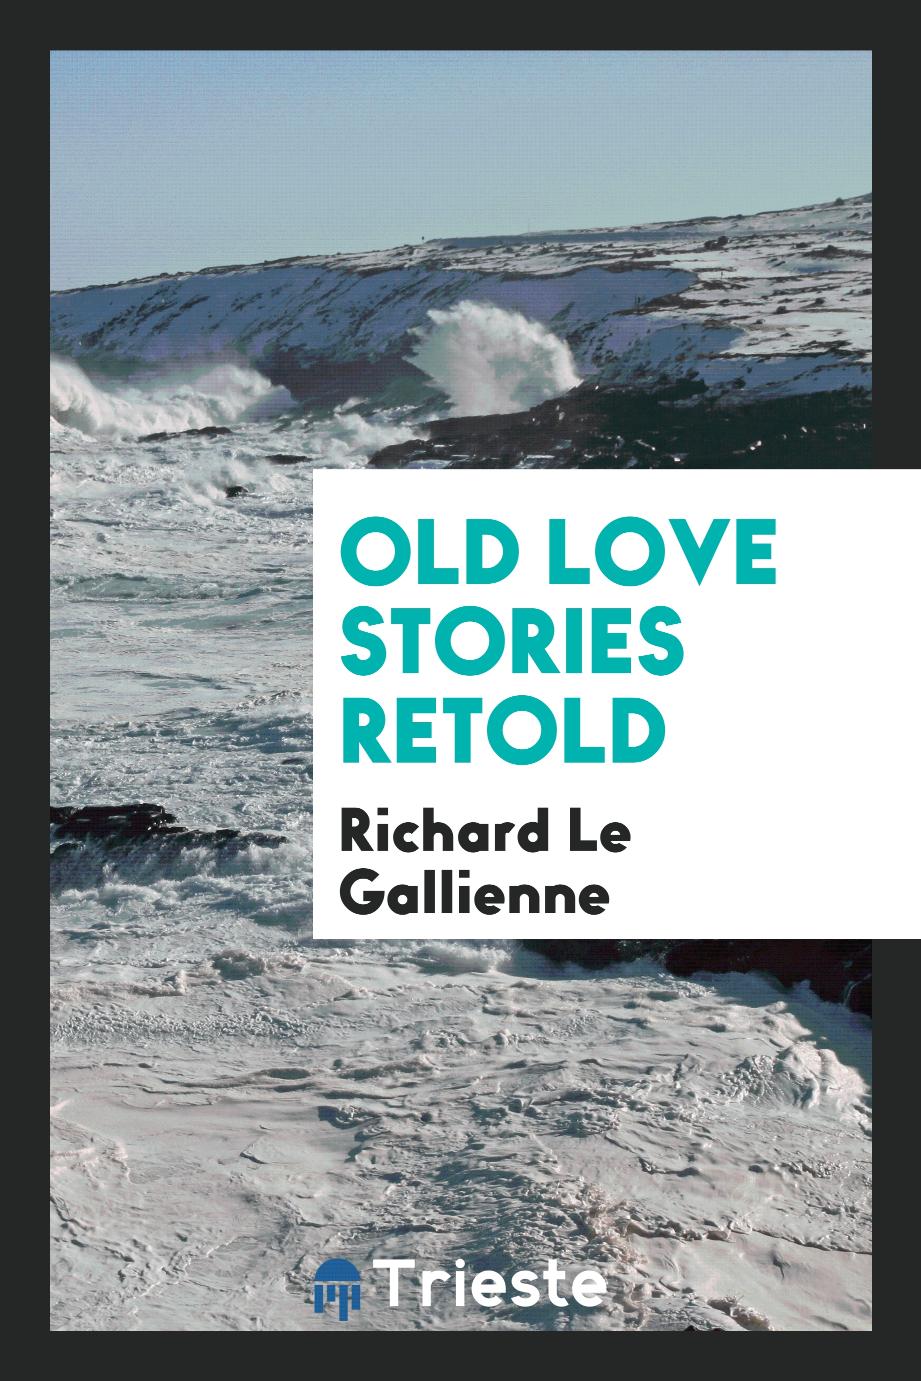 Old love stories retold